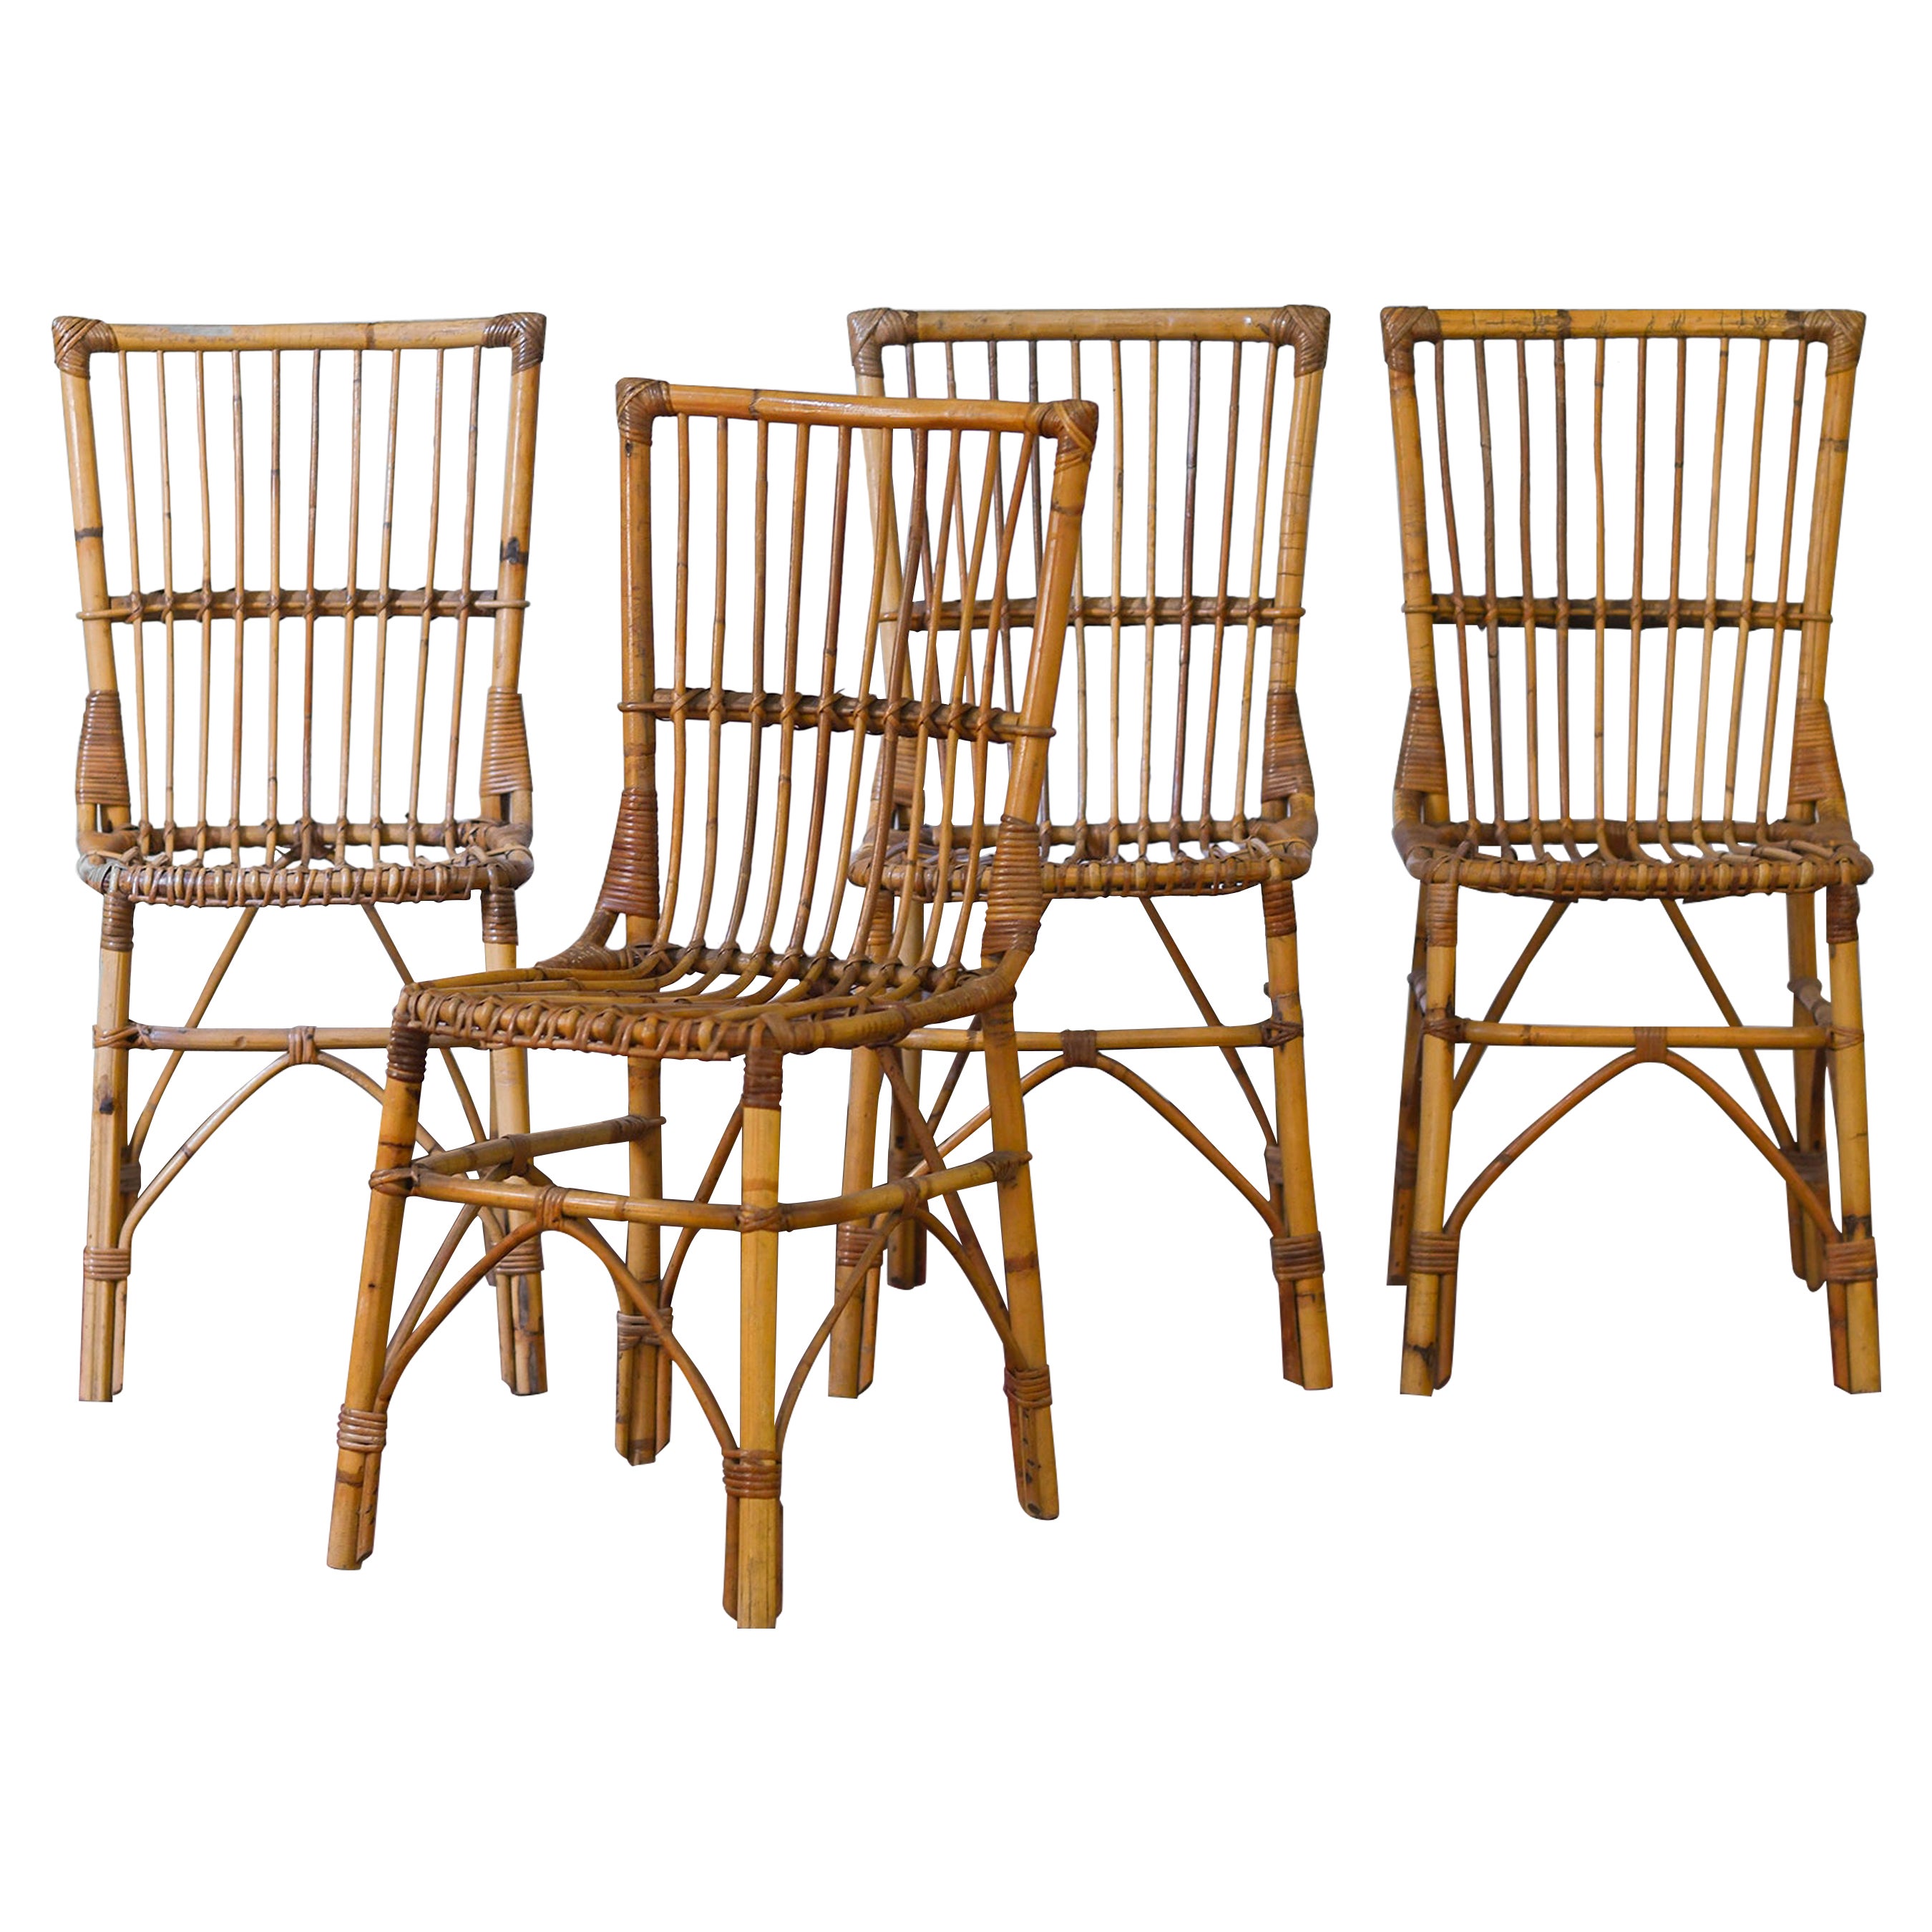 Set Of 4 Rattan Chairs With Squared Backs, 1980  